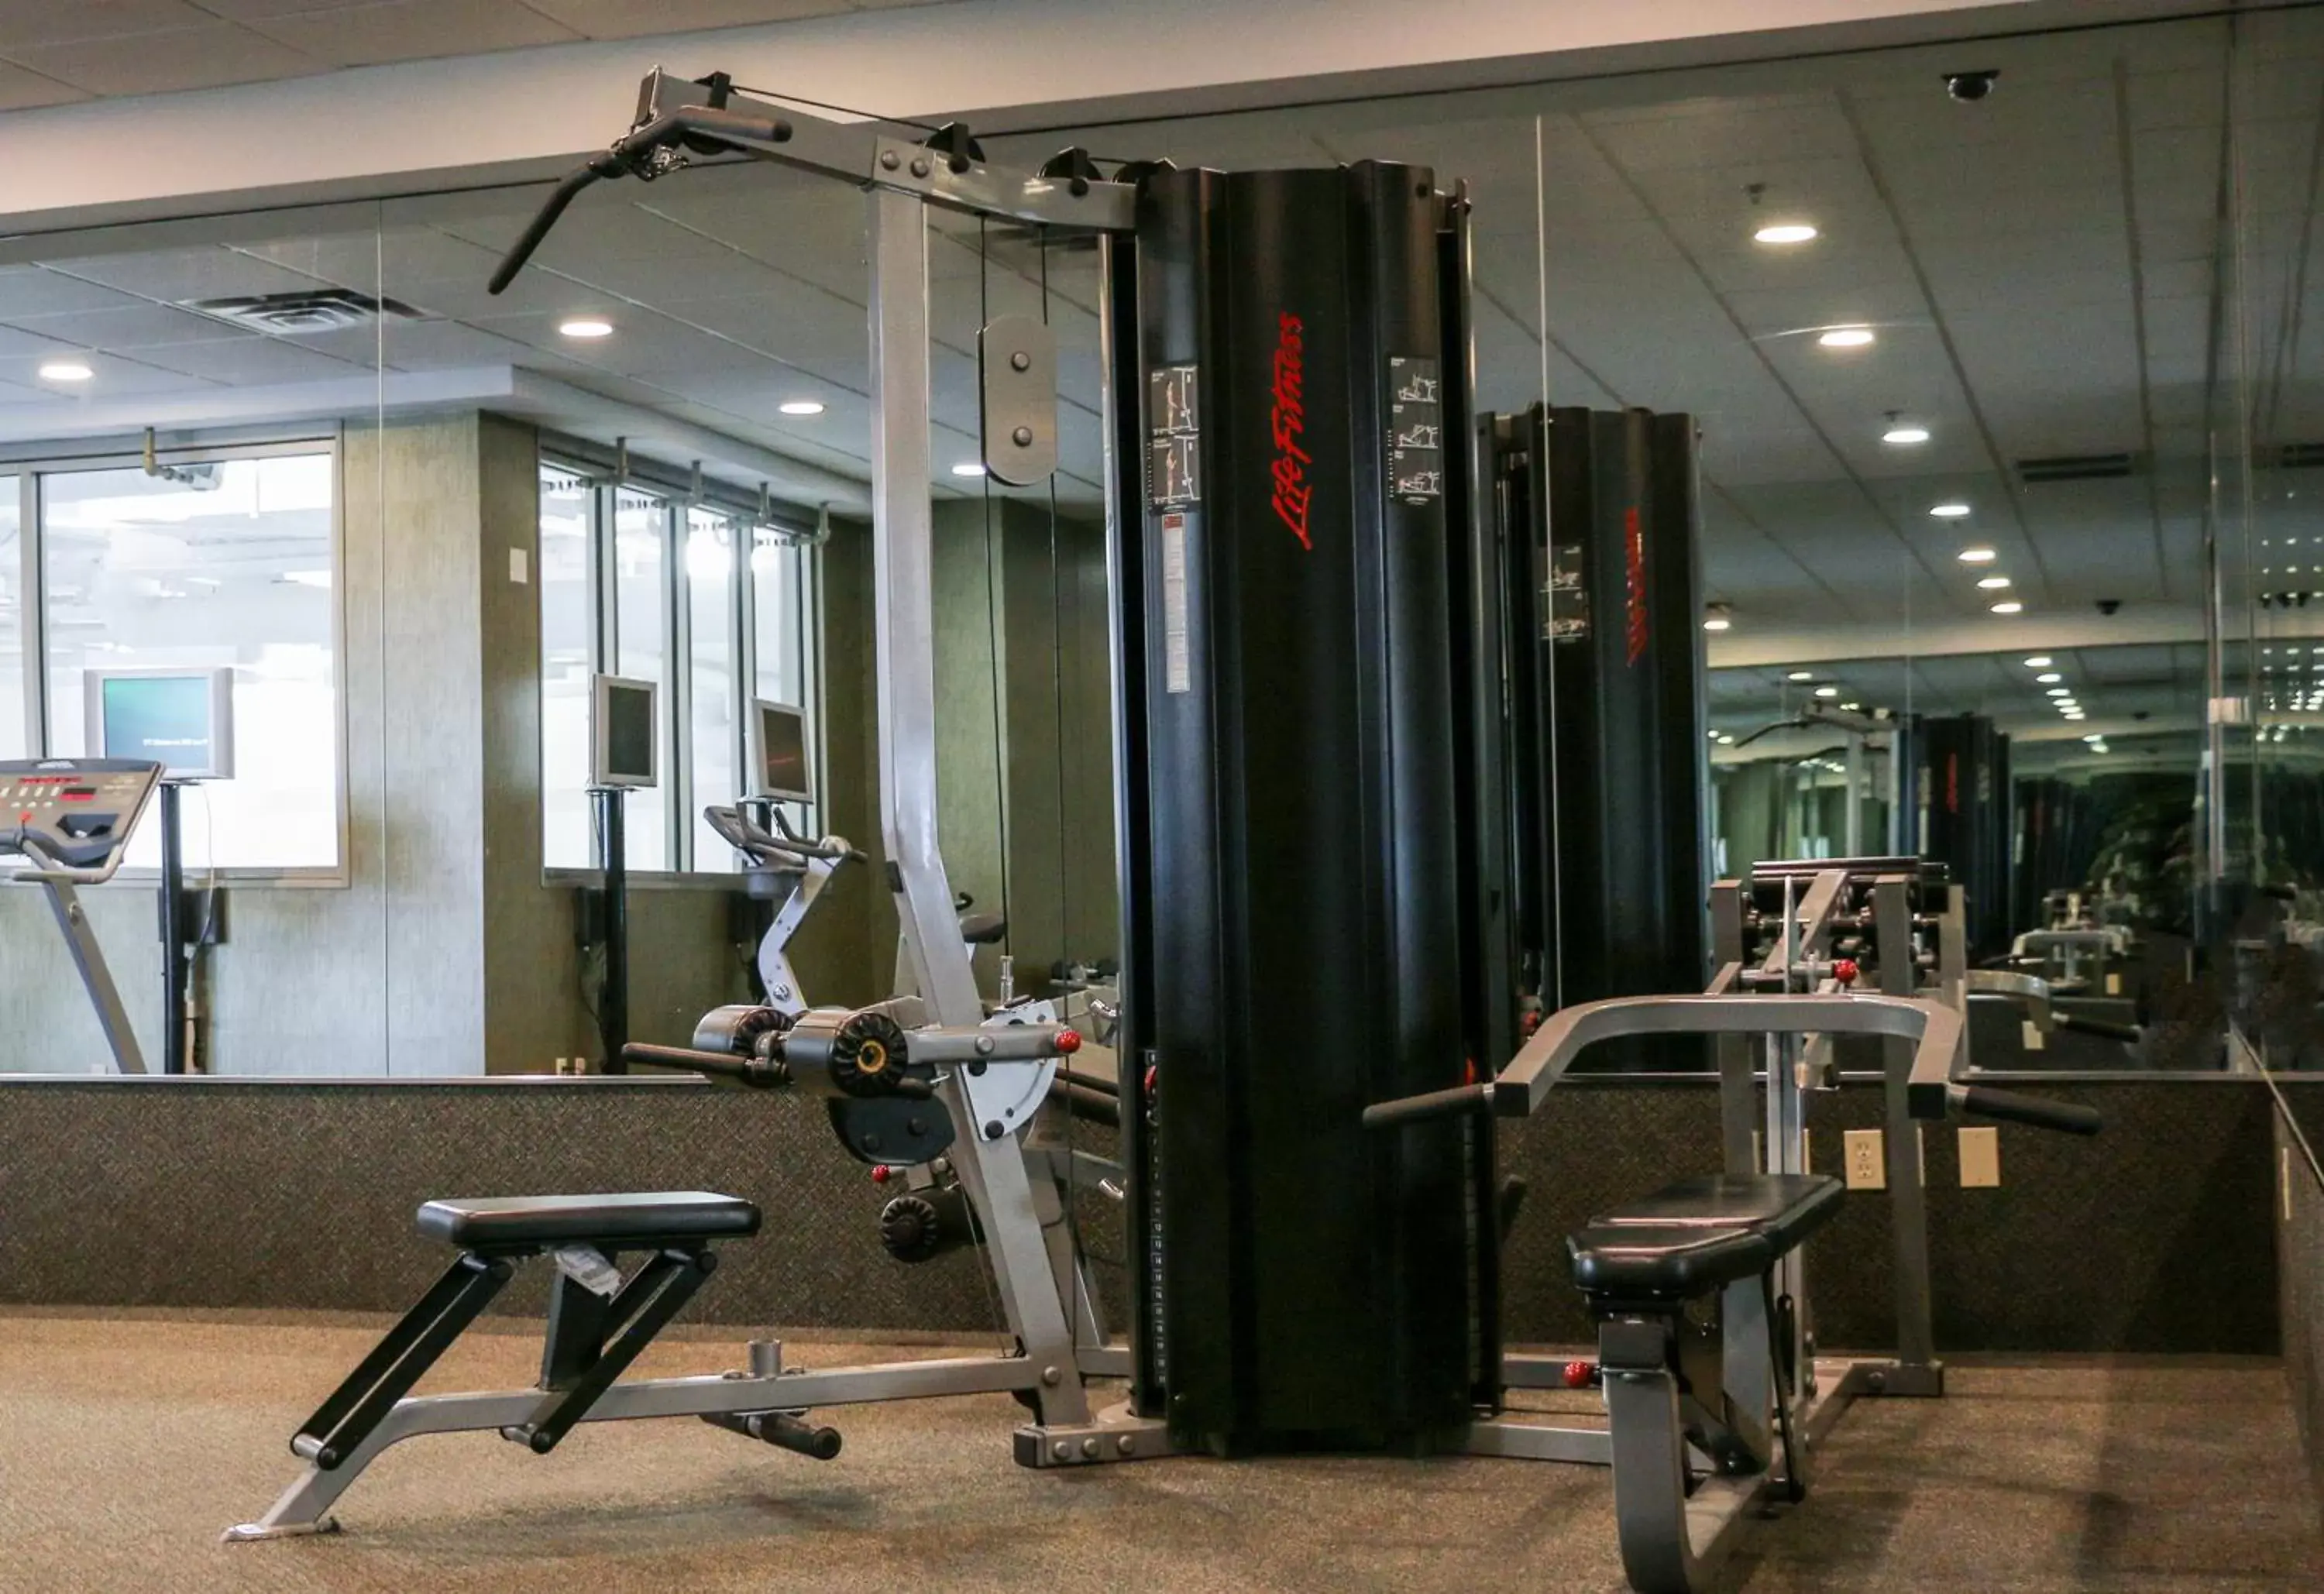 Fitness centre/facilities, Fitness Center/Facilities in Deerfoot Inn and Casino